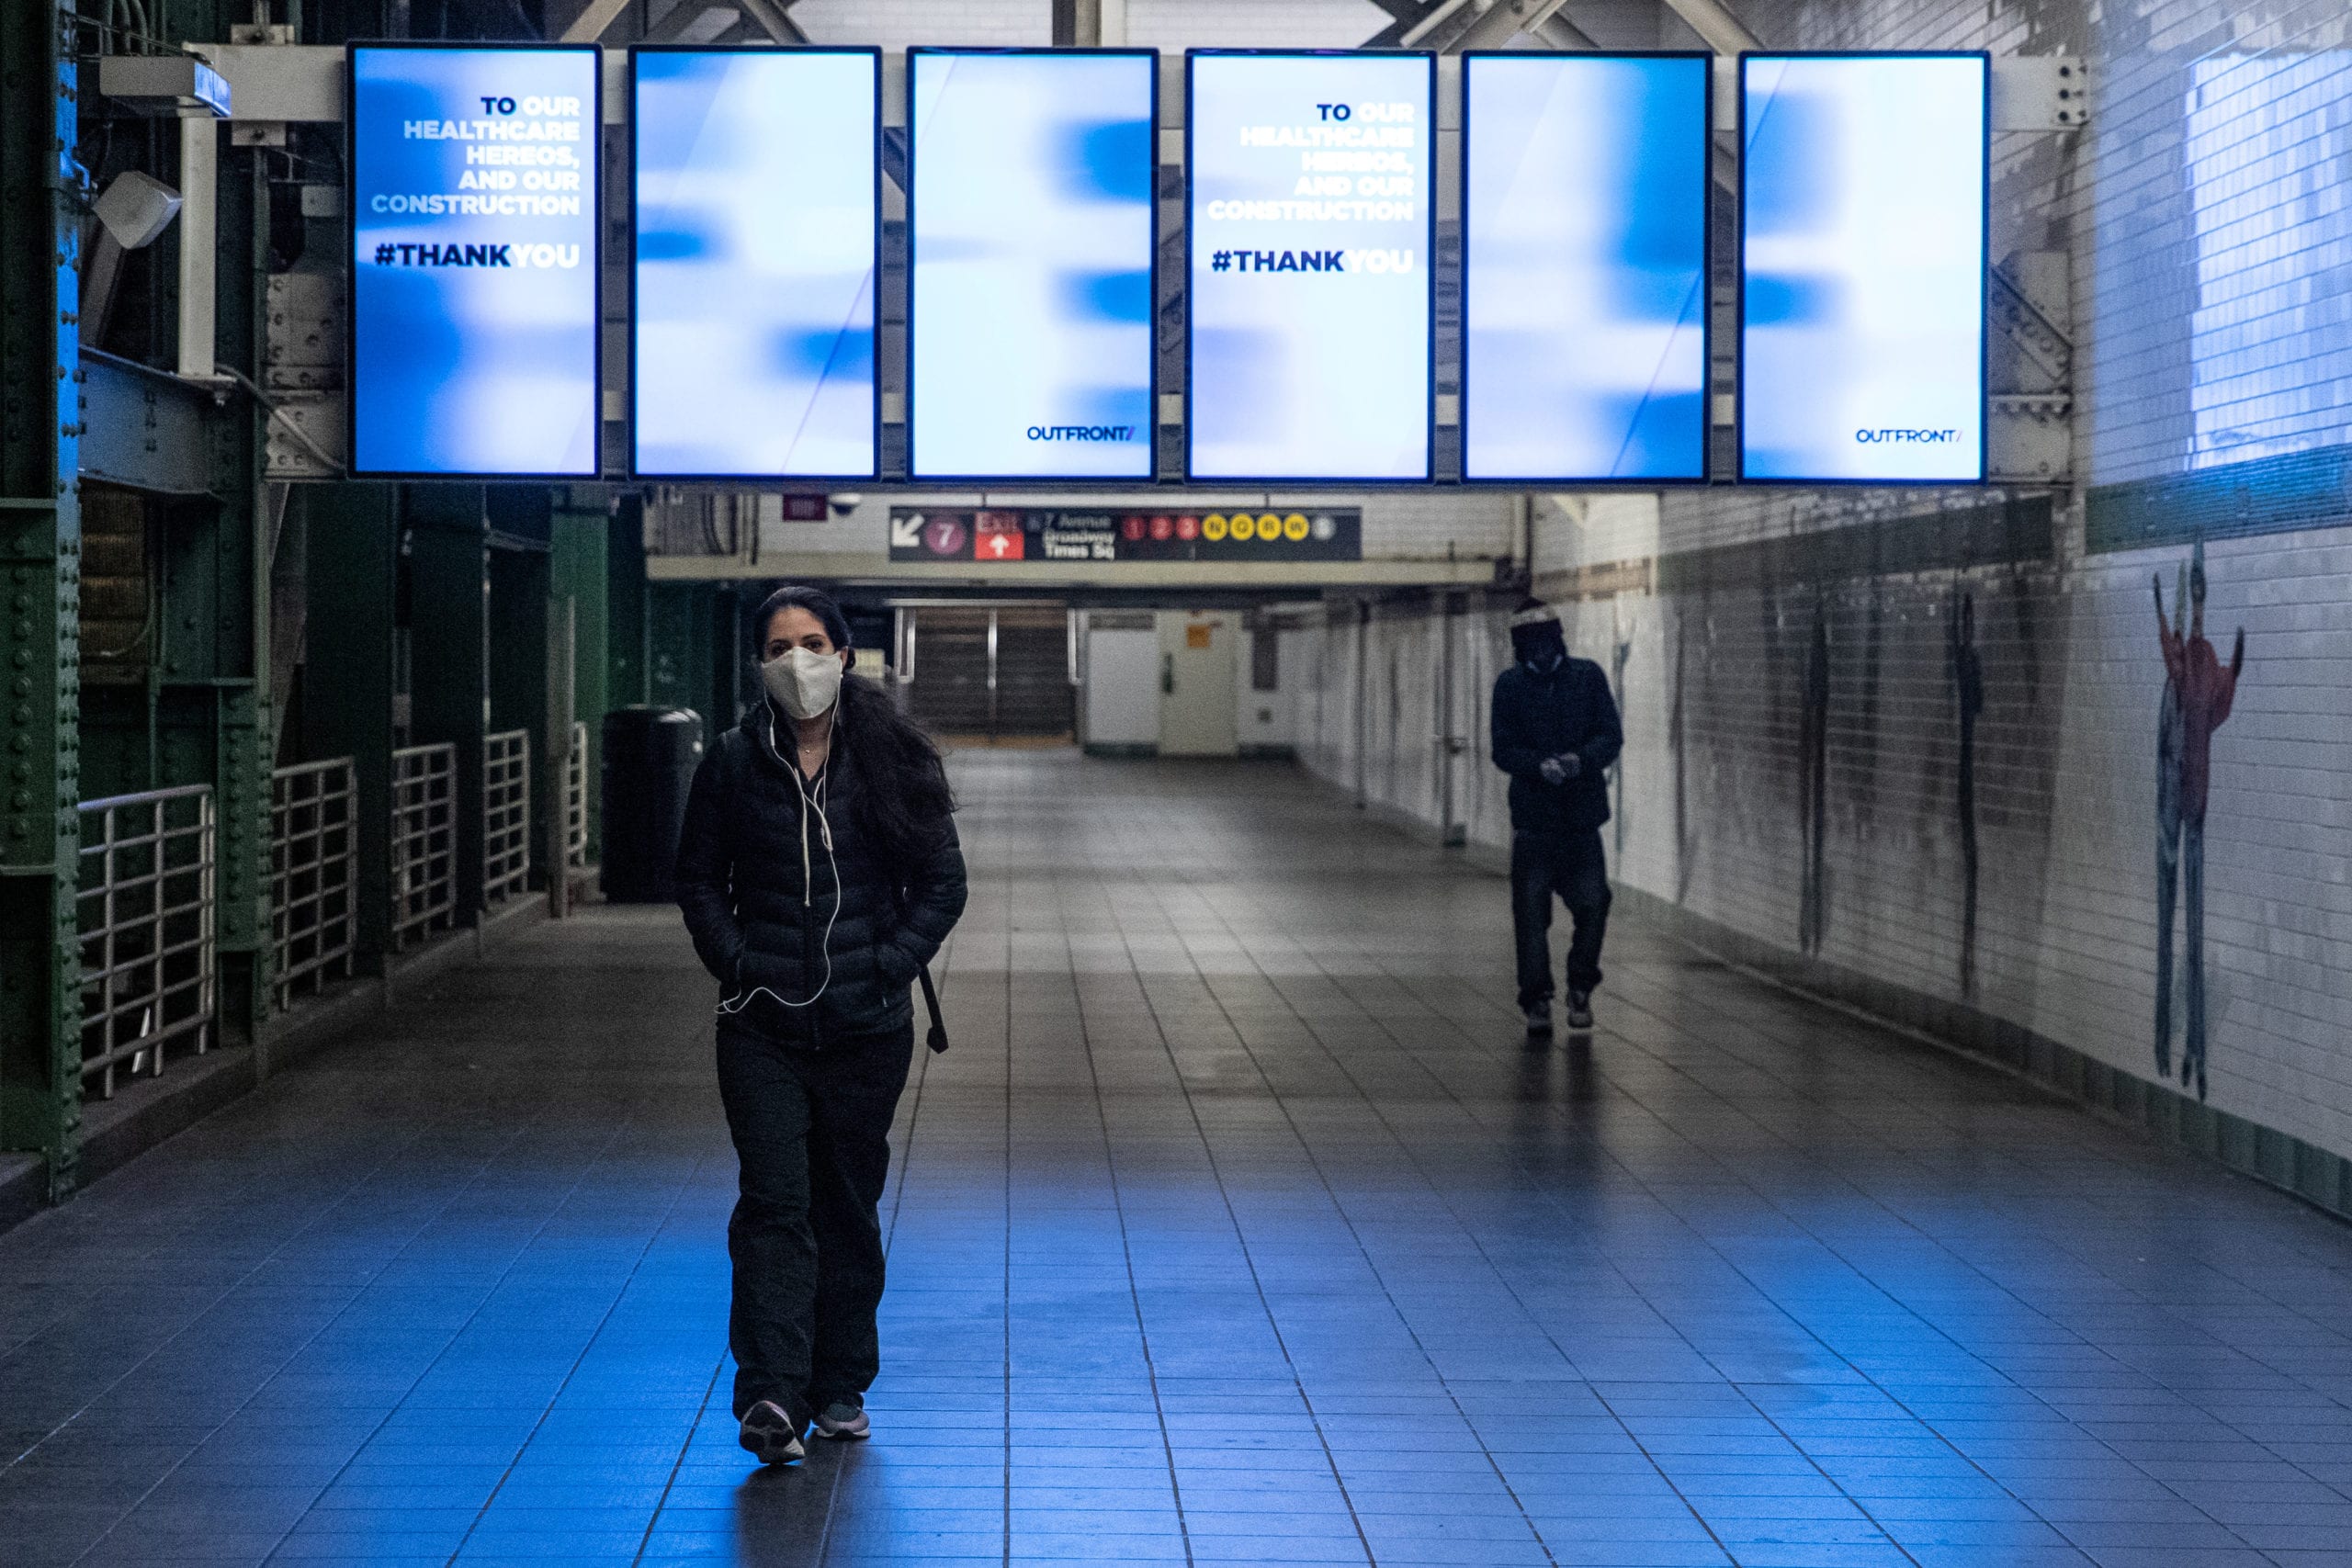 A woman wearing a face mask is seen in the Times Square subway station during the outbreak of the coronavirus disease (COVID-19) in New York City, U.S., April 17, 2020. REUTERS/Jeenah Moon - RC2M6G9N9GJN